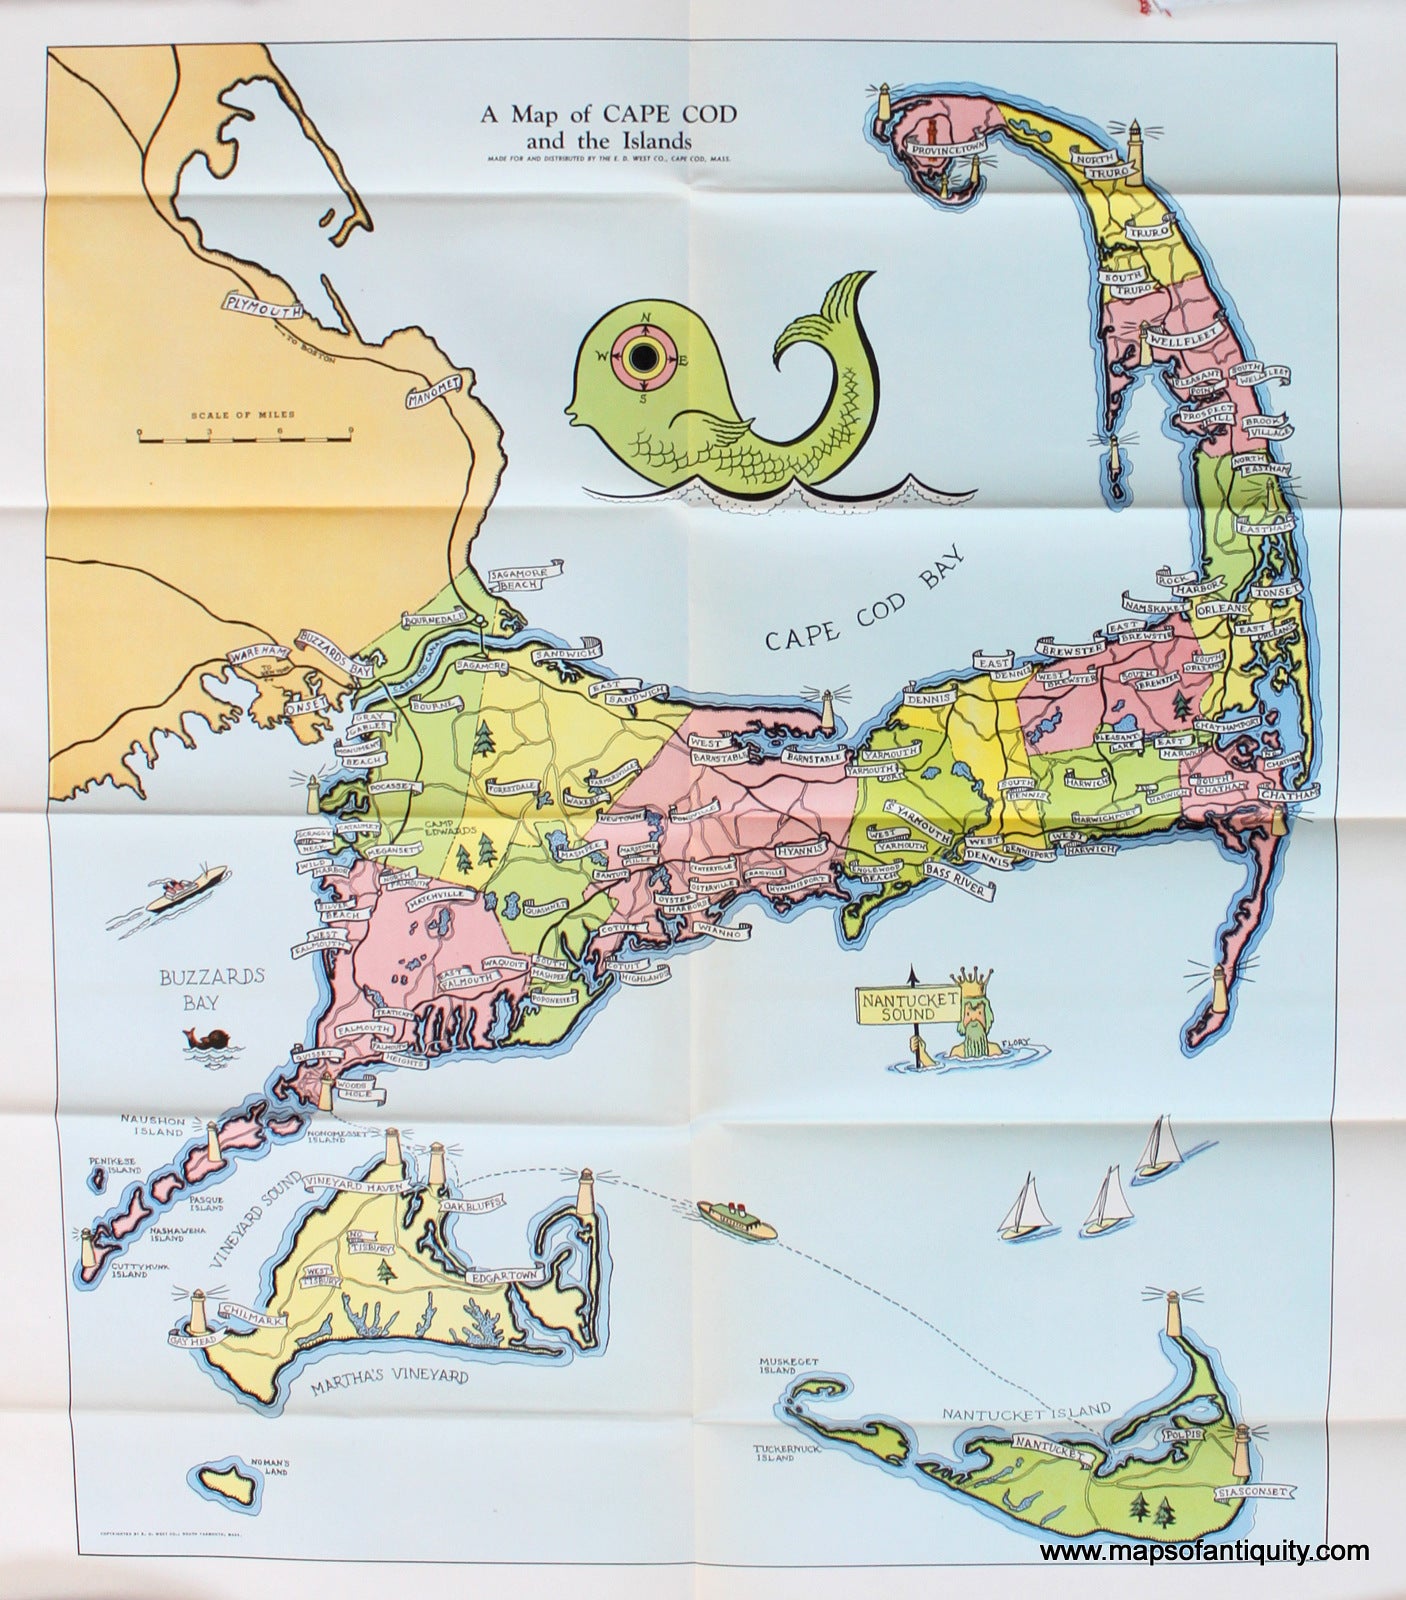 Antique-Printed-Color-Map-A-Map-of-CAPE-COD-and-the-Islands-Massachusetts-Cape-Cod-and-Islands-c.-1940-E.-D.-West-Co.-Maps-Of-Antiquity